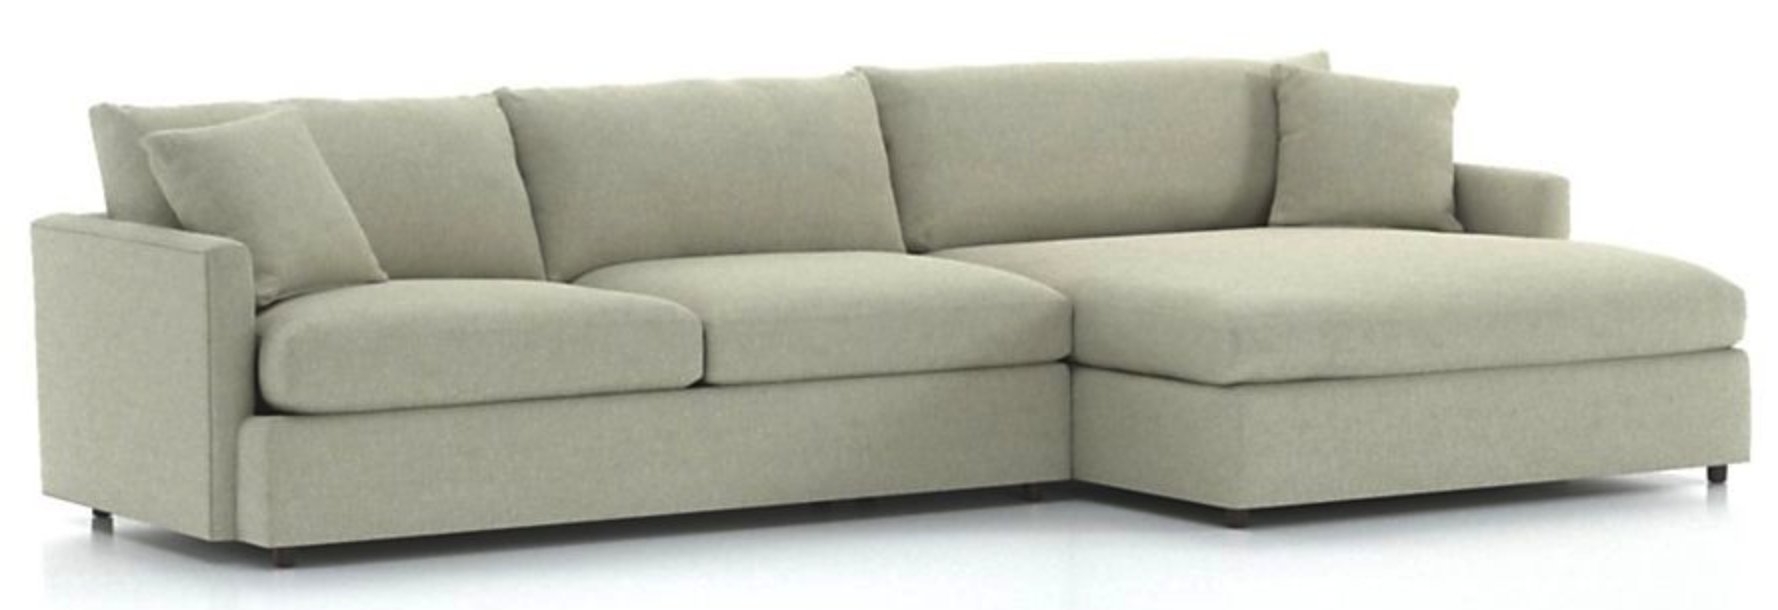 Lounge II Petite 2-Piece Right Arm Double Chaise Sectional Sofa - Image 0